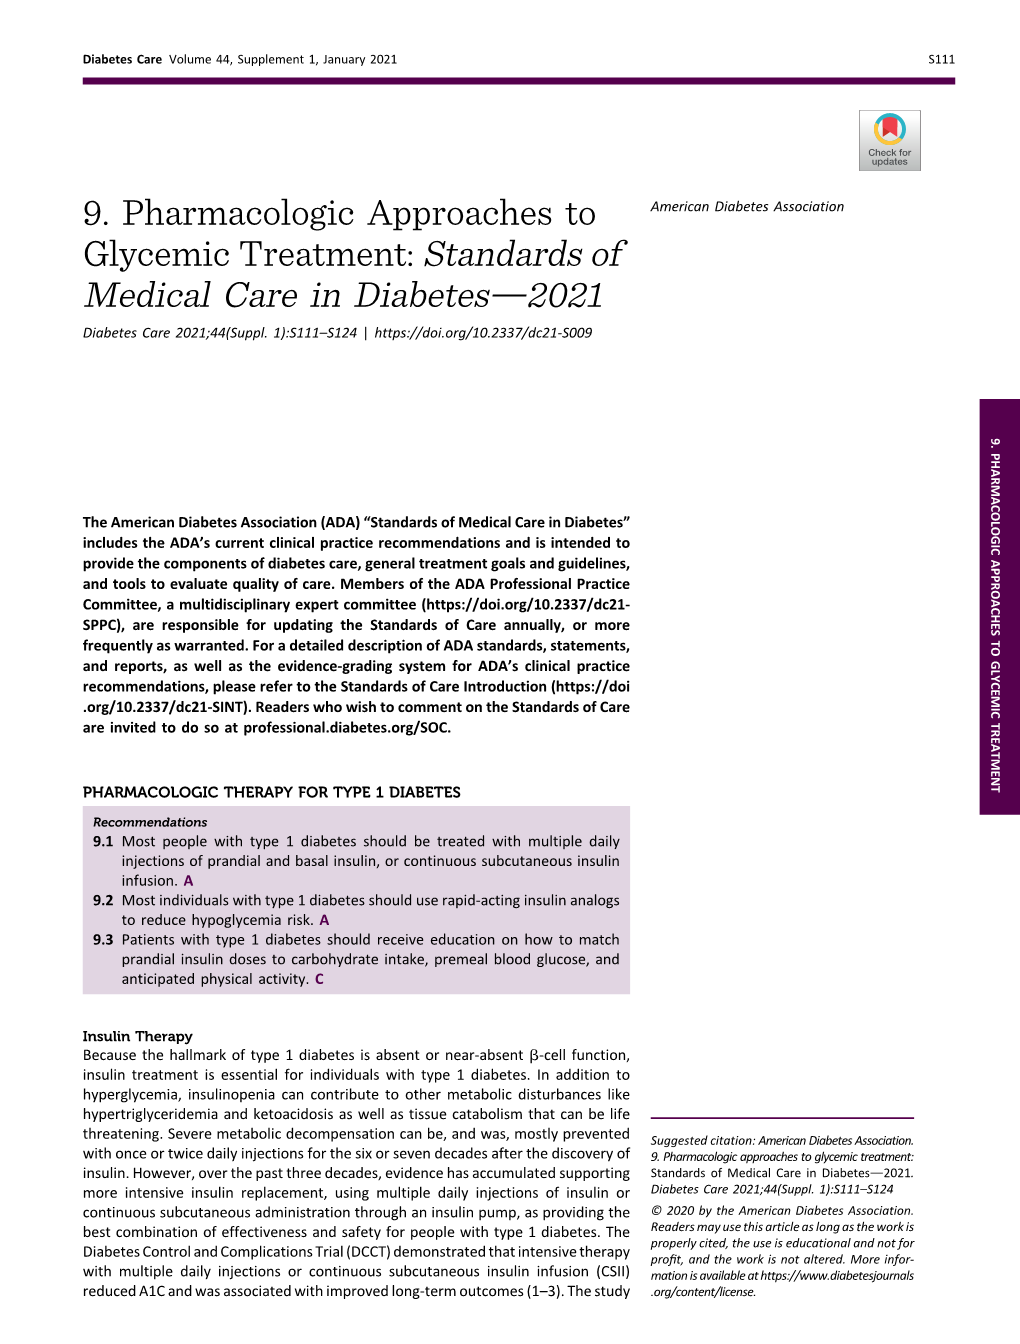 9. Pharmacologic Approaches to Glycemic Treatment: Standards of Medical Care in Diabetes—2021